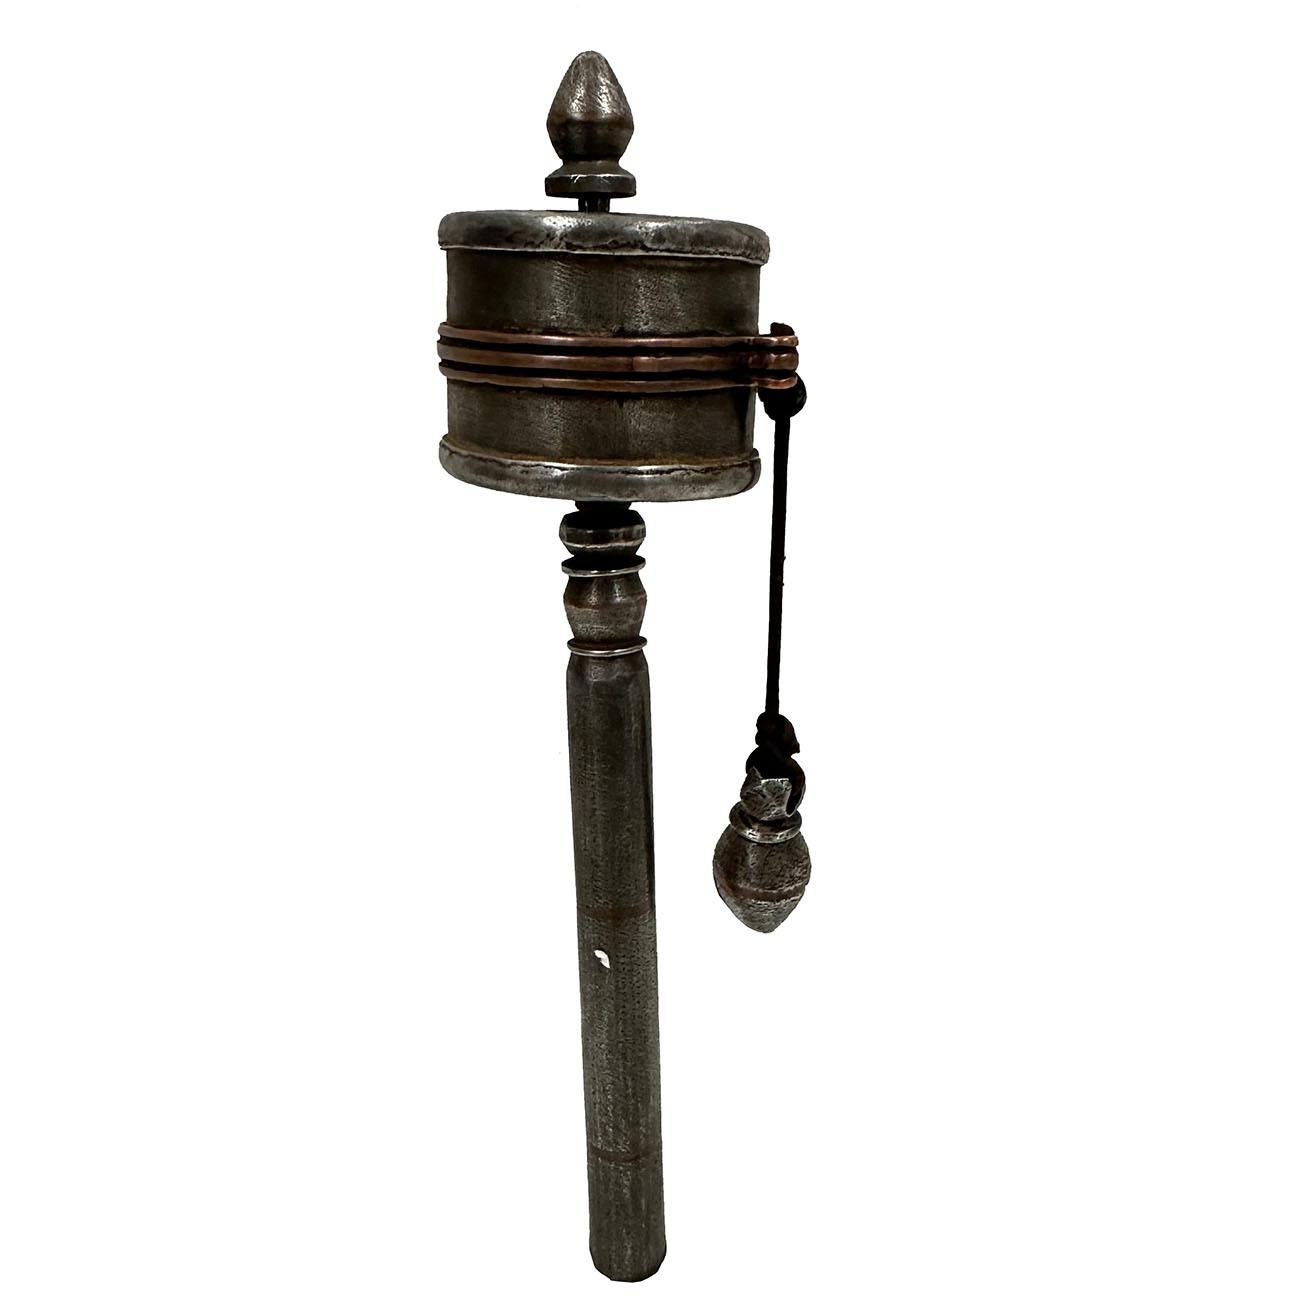 This is handcrafted Tibetan handheld spinning Prayer Wheel. This spinning prayer wheel was made from Sky Iron and has detailed handcrafted Tibetan traditional design with Copper wire inlay. It was used for travel or daily pray. Sky Iron is an item